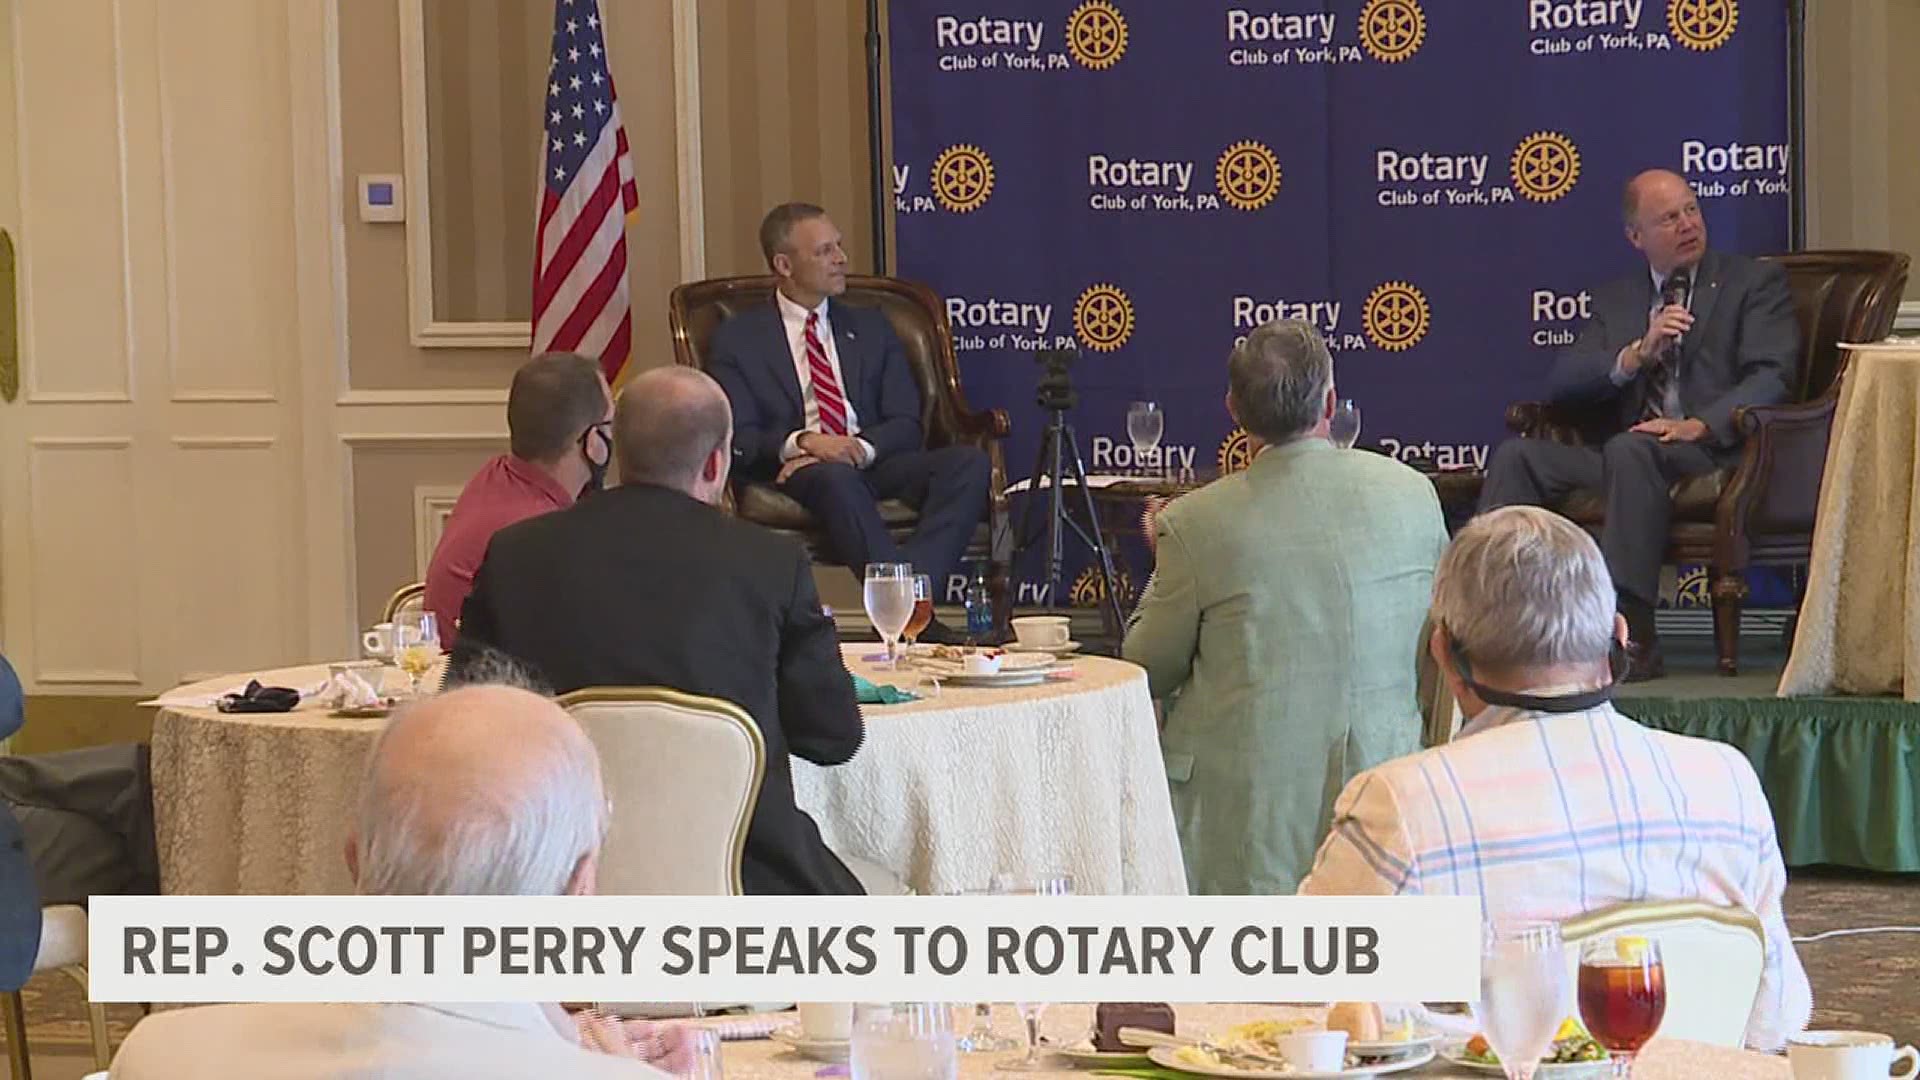 The Congressman was in the area to speak at the Rotary Club of York